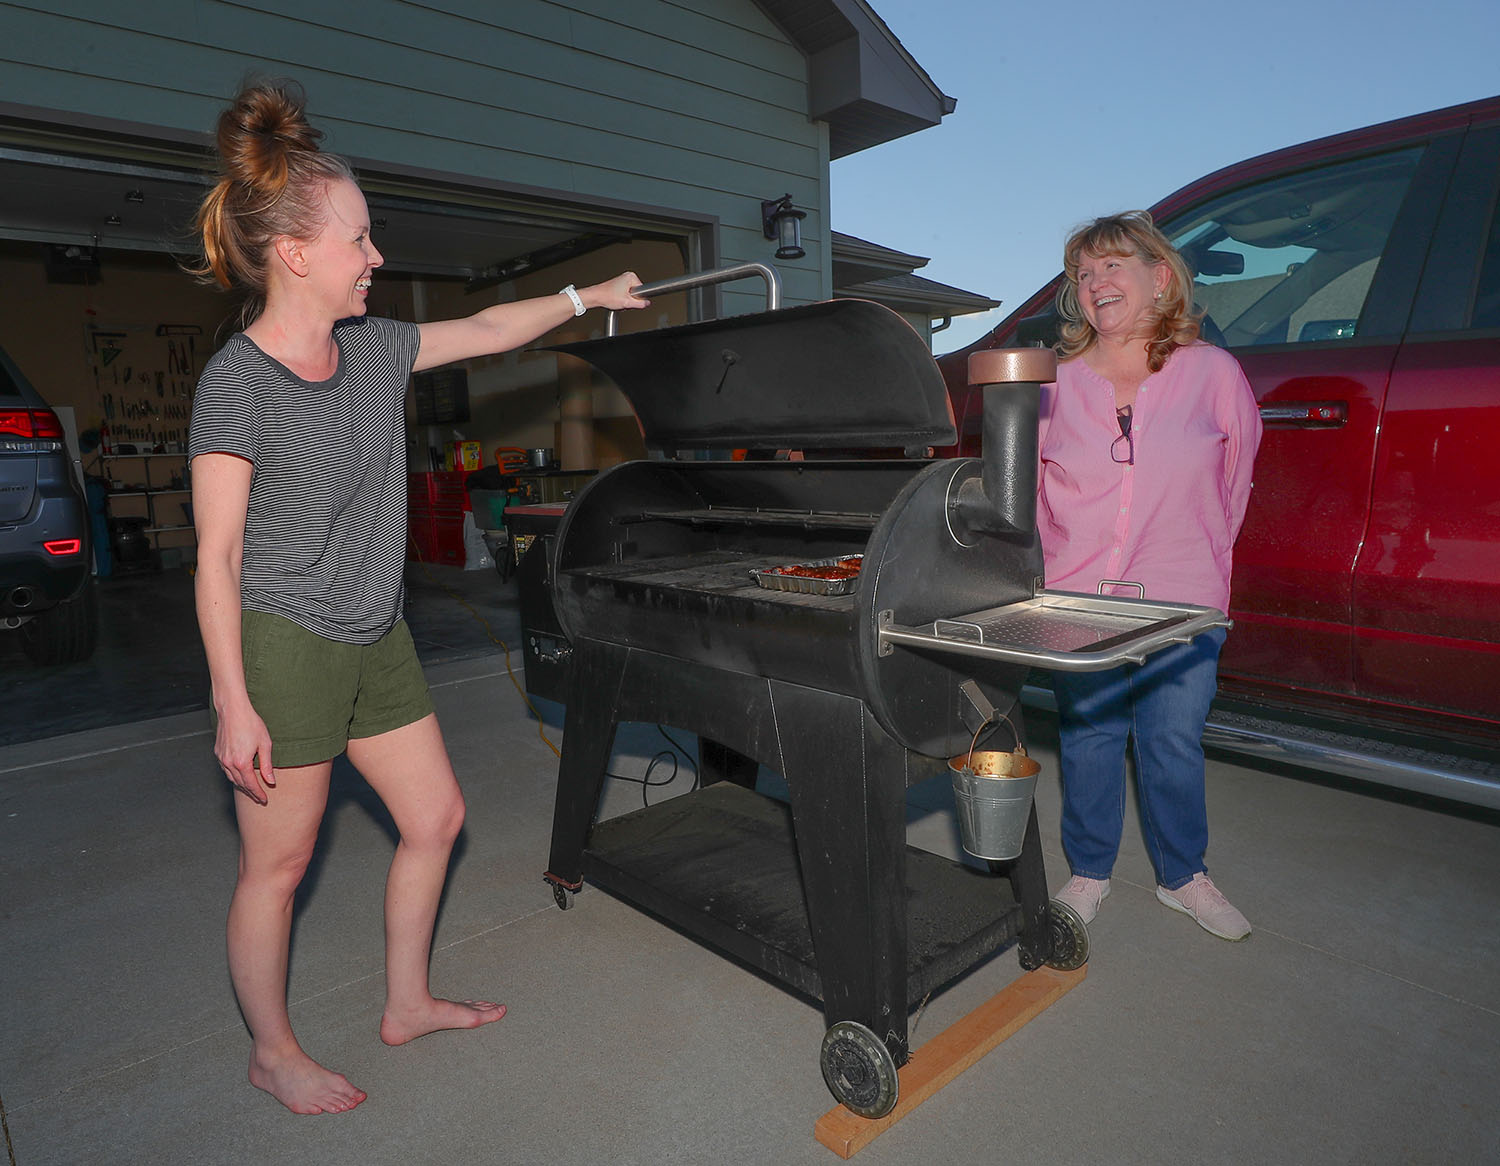 UNK family studies professor Tami Moore, right, chats with neighbor Jolene Jahn on Tuesday evening. Moore and UNK exercise science professor Greg Brown teamed up to start neighborhood celebrations in Kearney that allow people to interact while following social distancing guidelines.